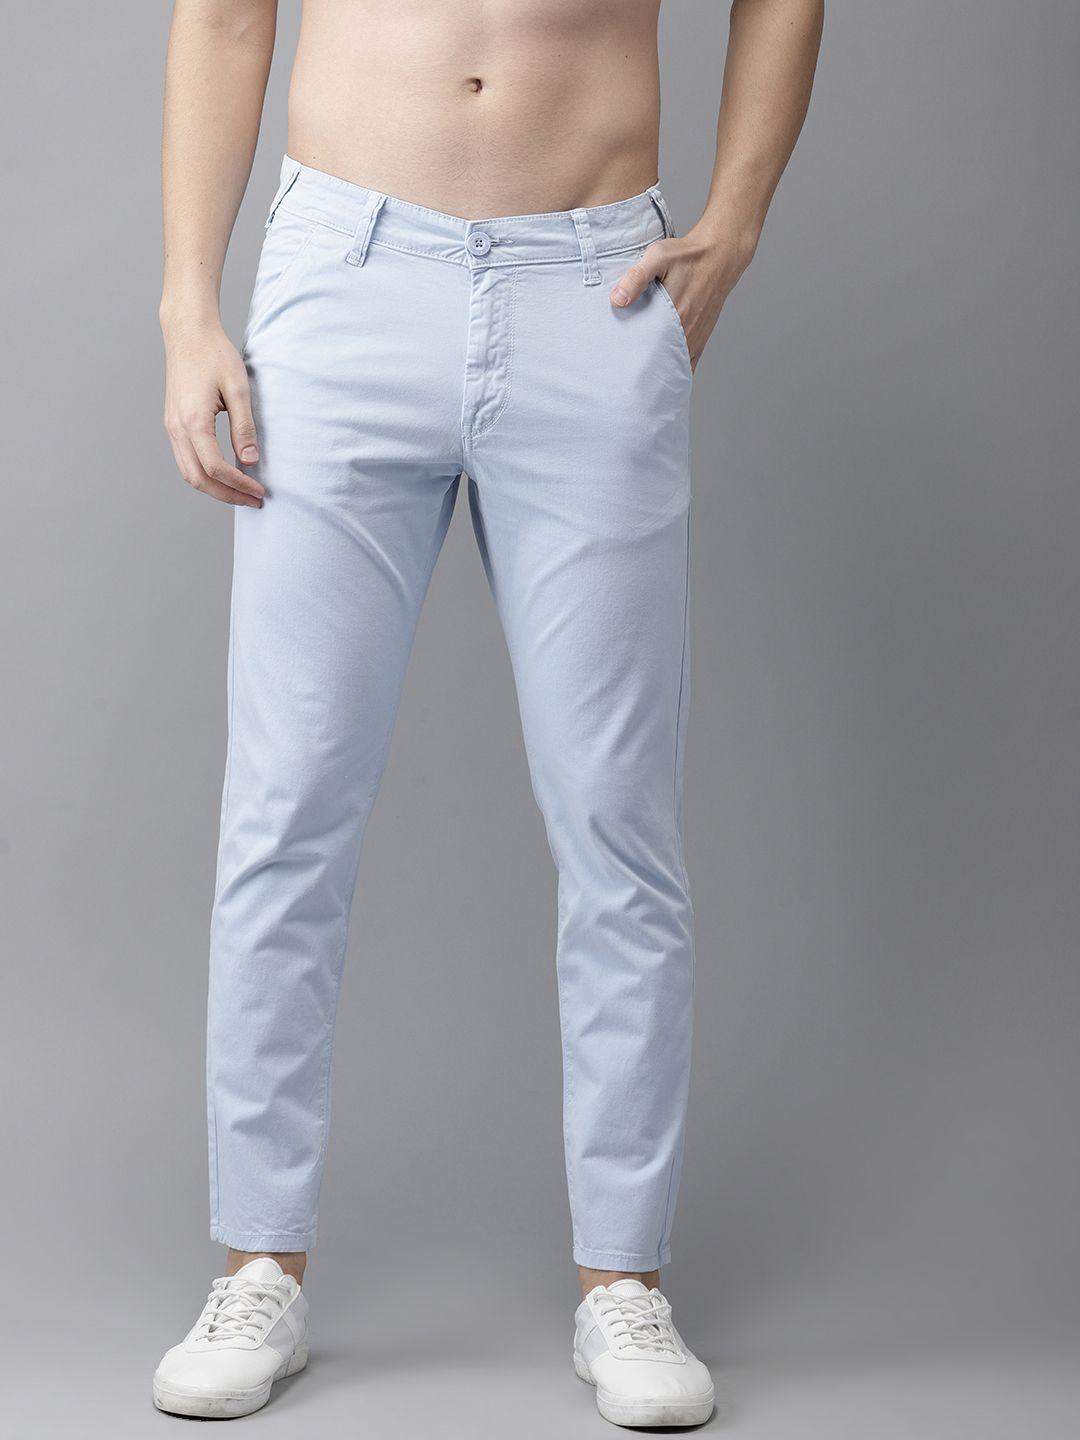 here&now men blue slim fit chinos